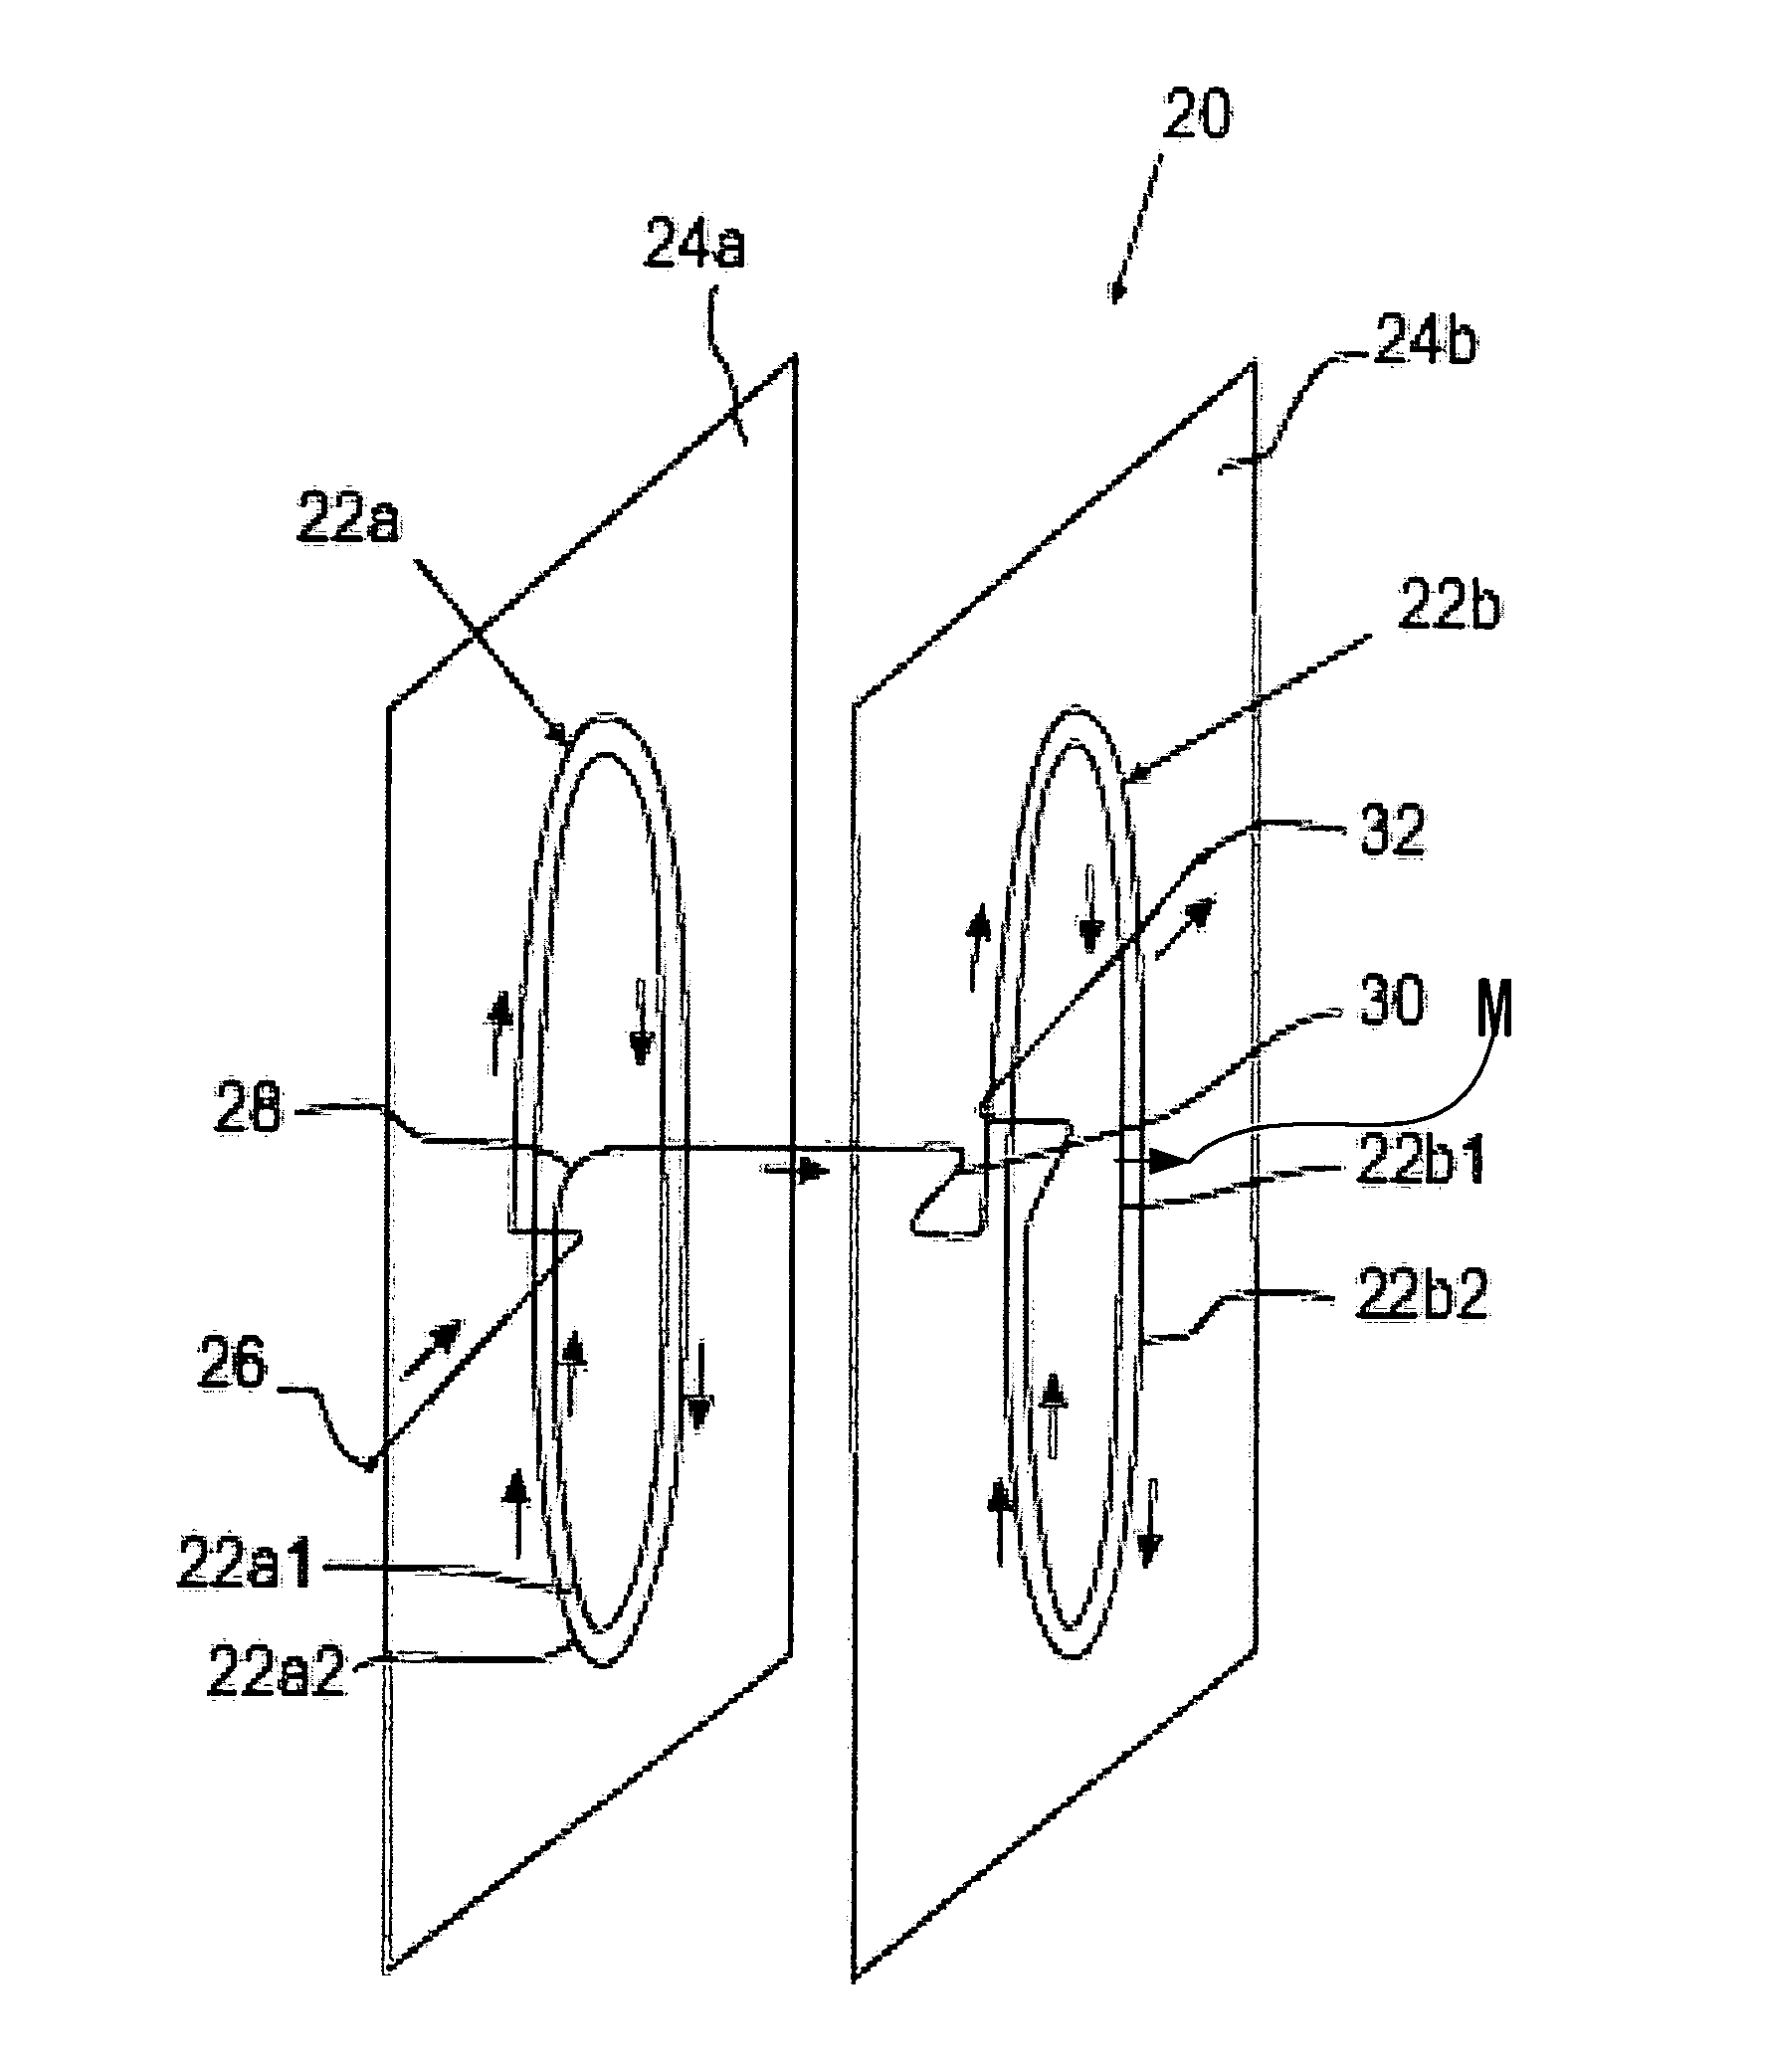 RF antenna assembly for treatment of inner surfaces of tubes with inductively coupled plasma